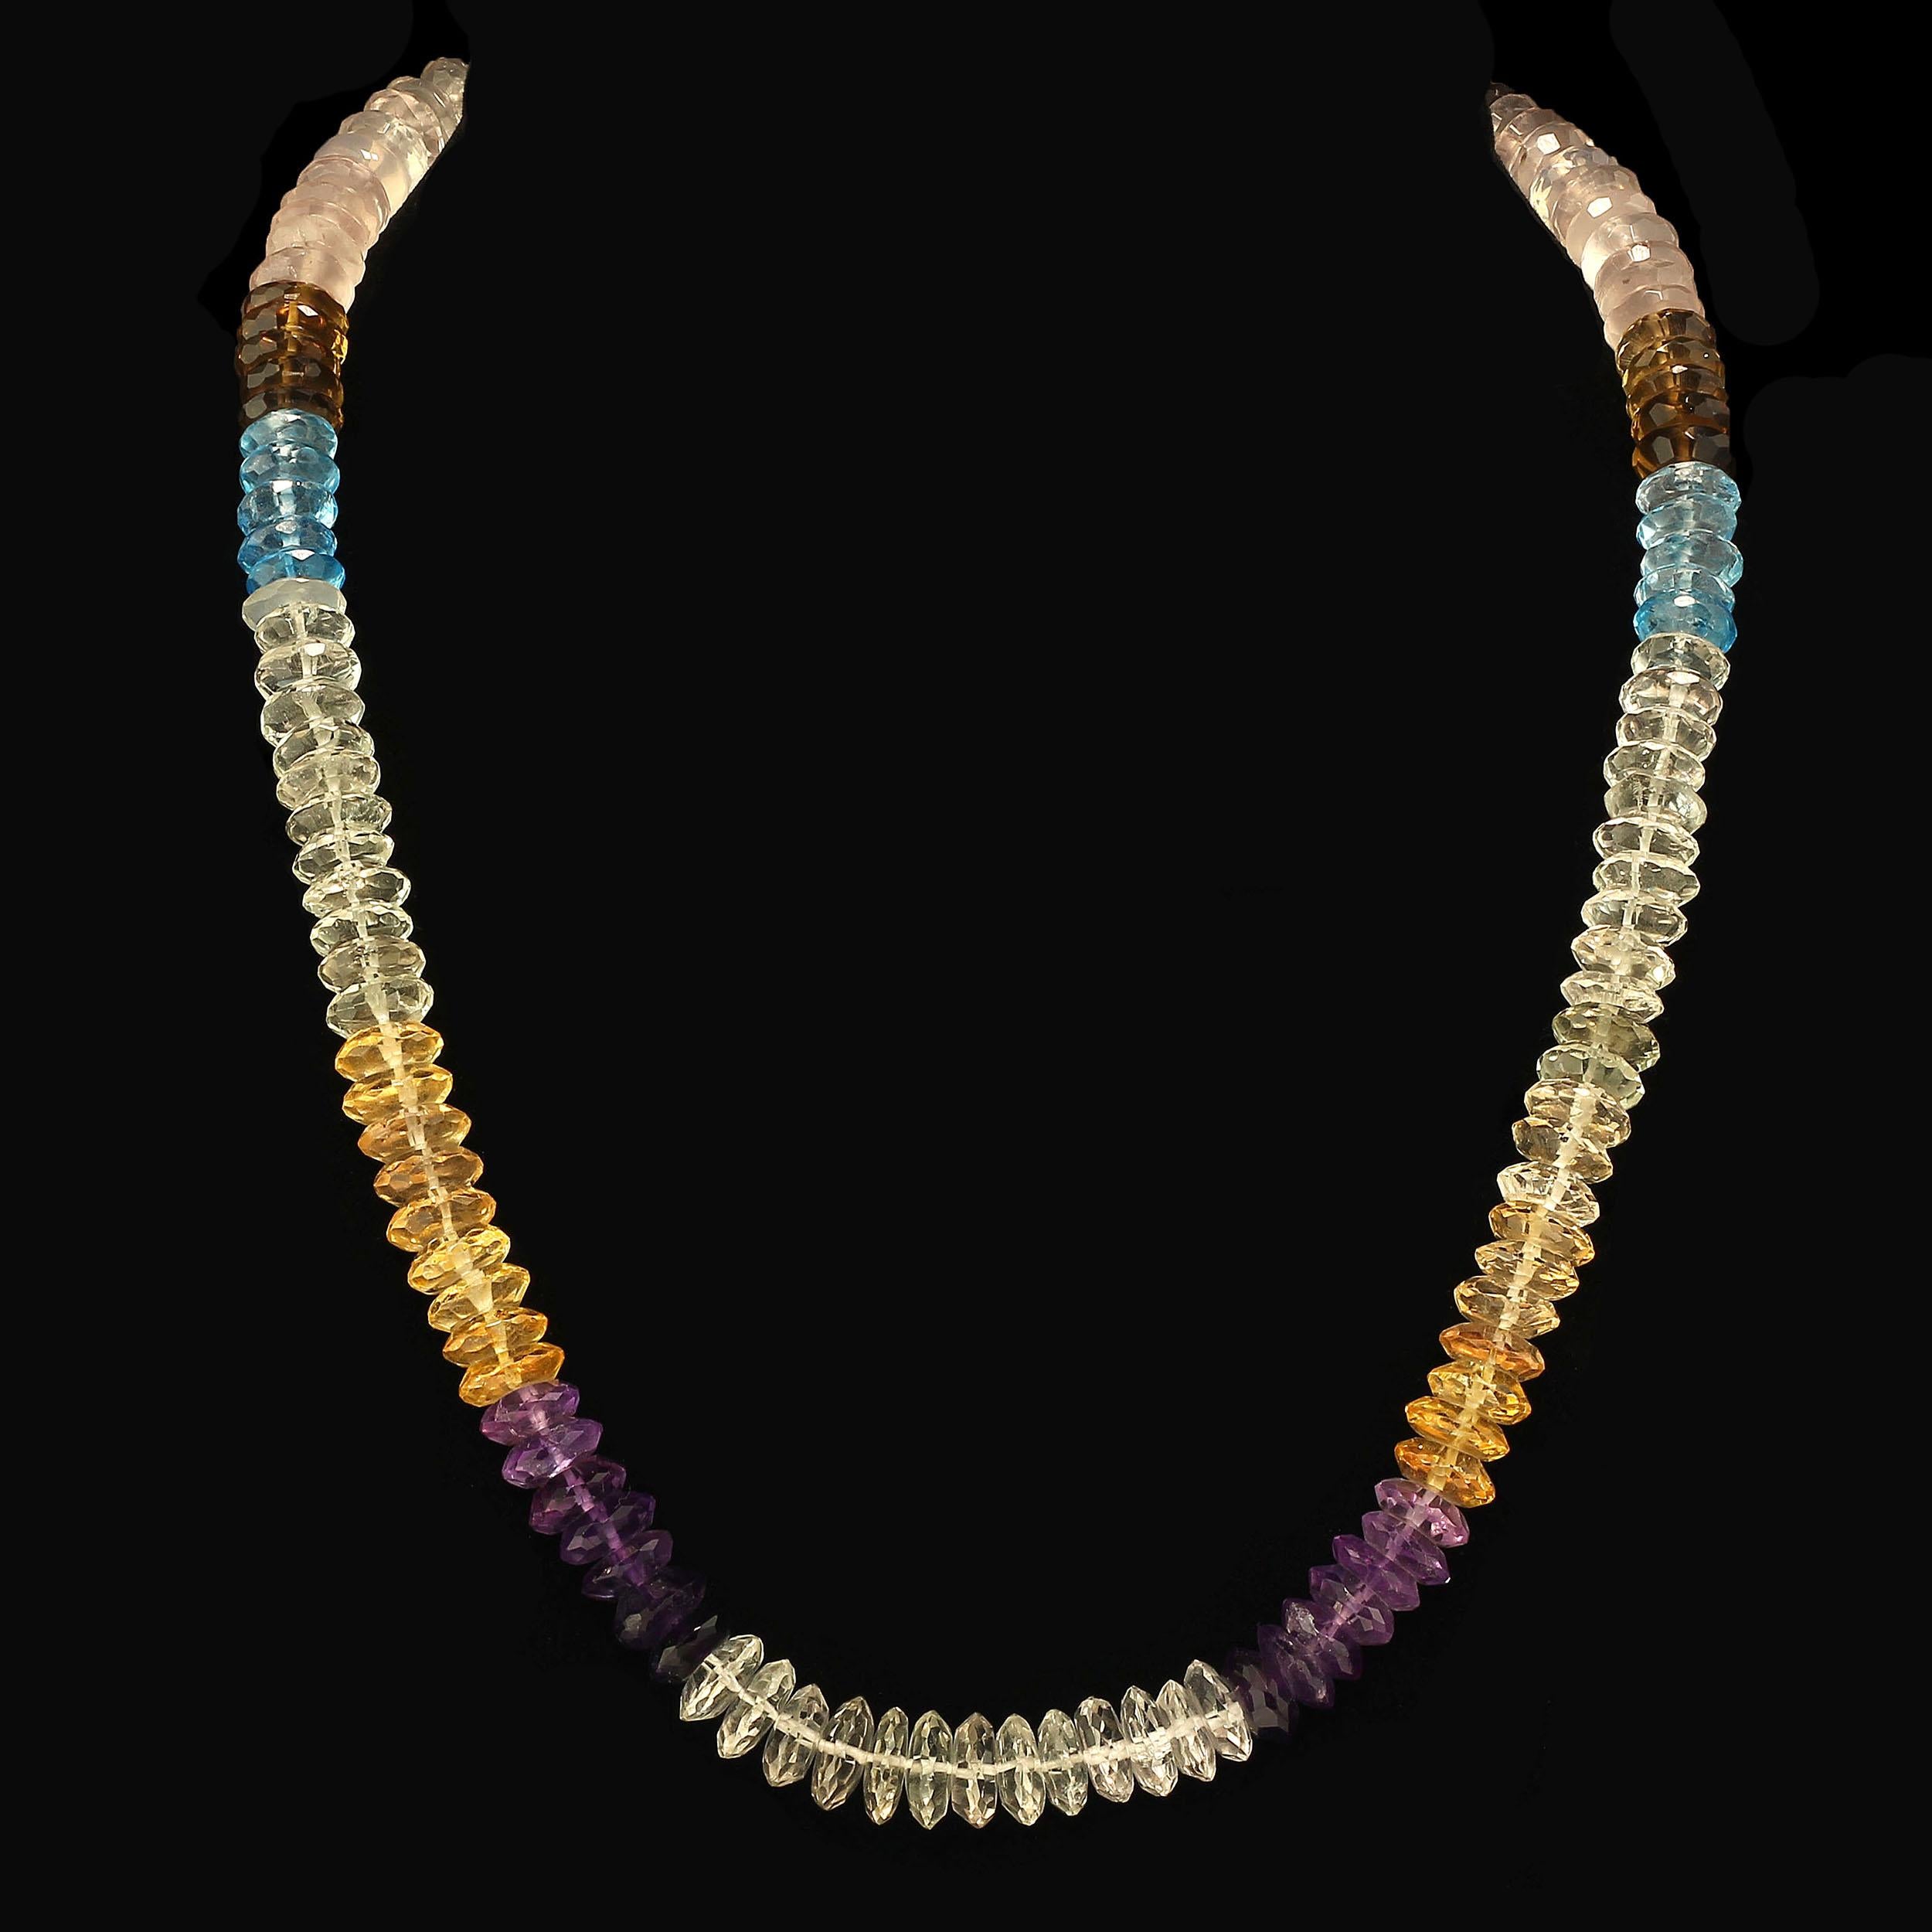 Lots of color in the lovely gemstone necklace. Wear this expandable necklace, 17-18.5 inches, to enhance your entire wardrobe. The lively colors are a delight, amethyst, citrine, rose quartz, green quartz, smoky, blue topaz, quartz crystal all